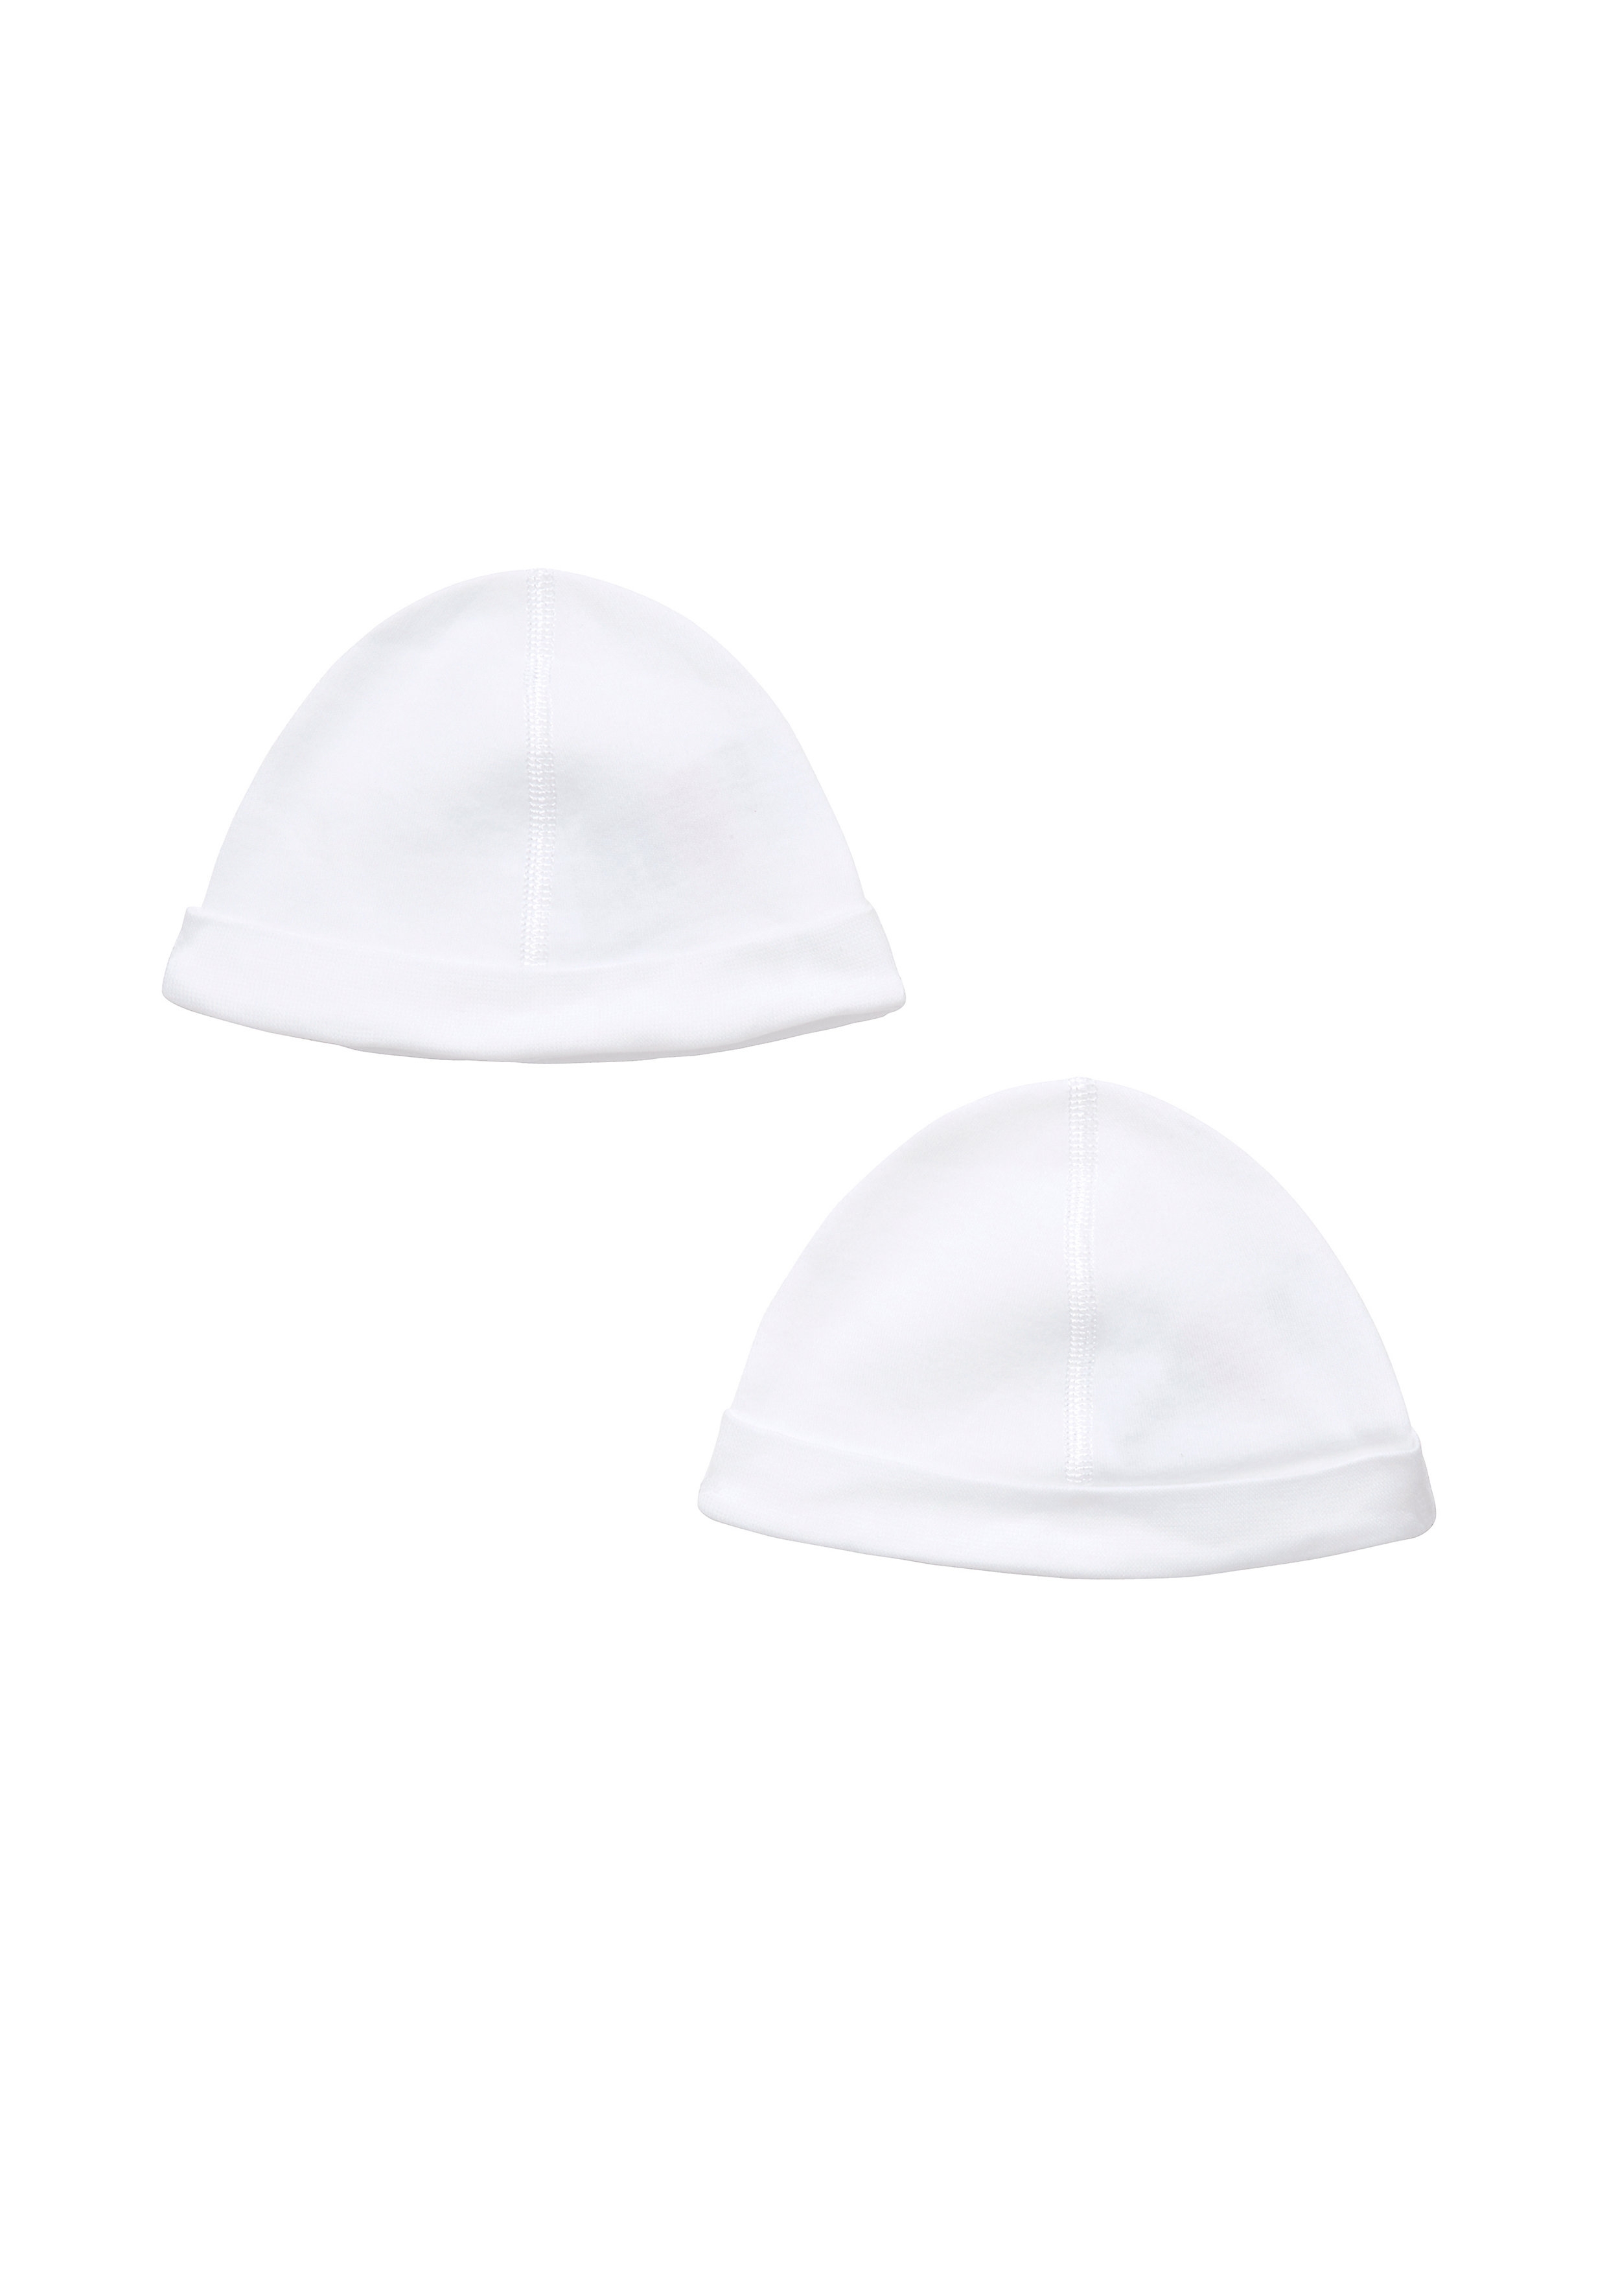 Mothercare | Unisex Hat - Pack Of 2 - White